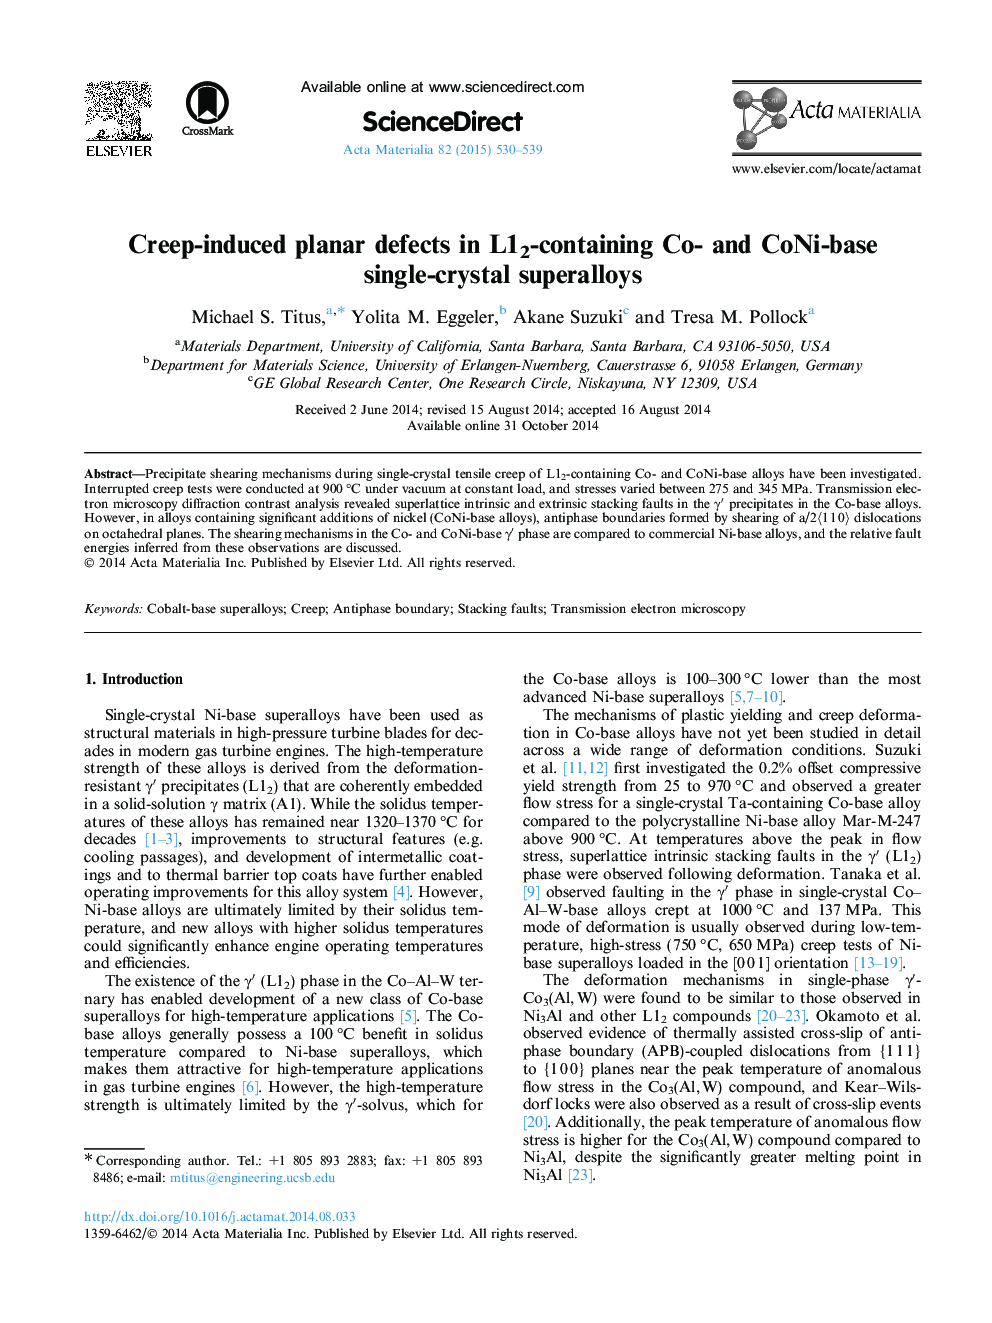 Creep-induced planar defects in L12-containing Co- and CoNi-base single-crystal superalloys